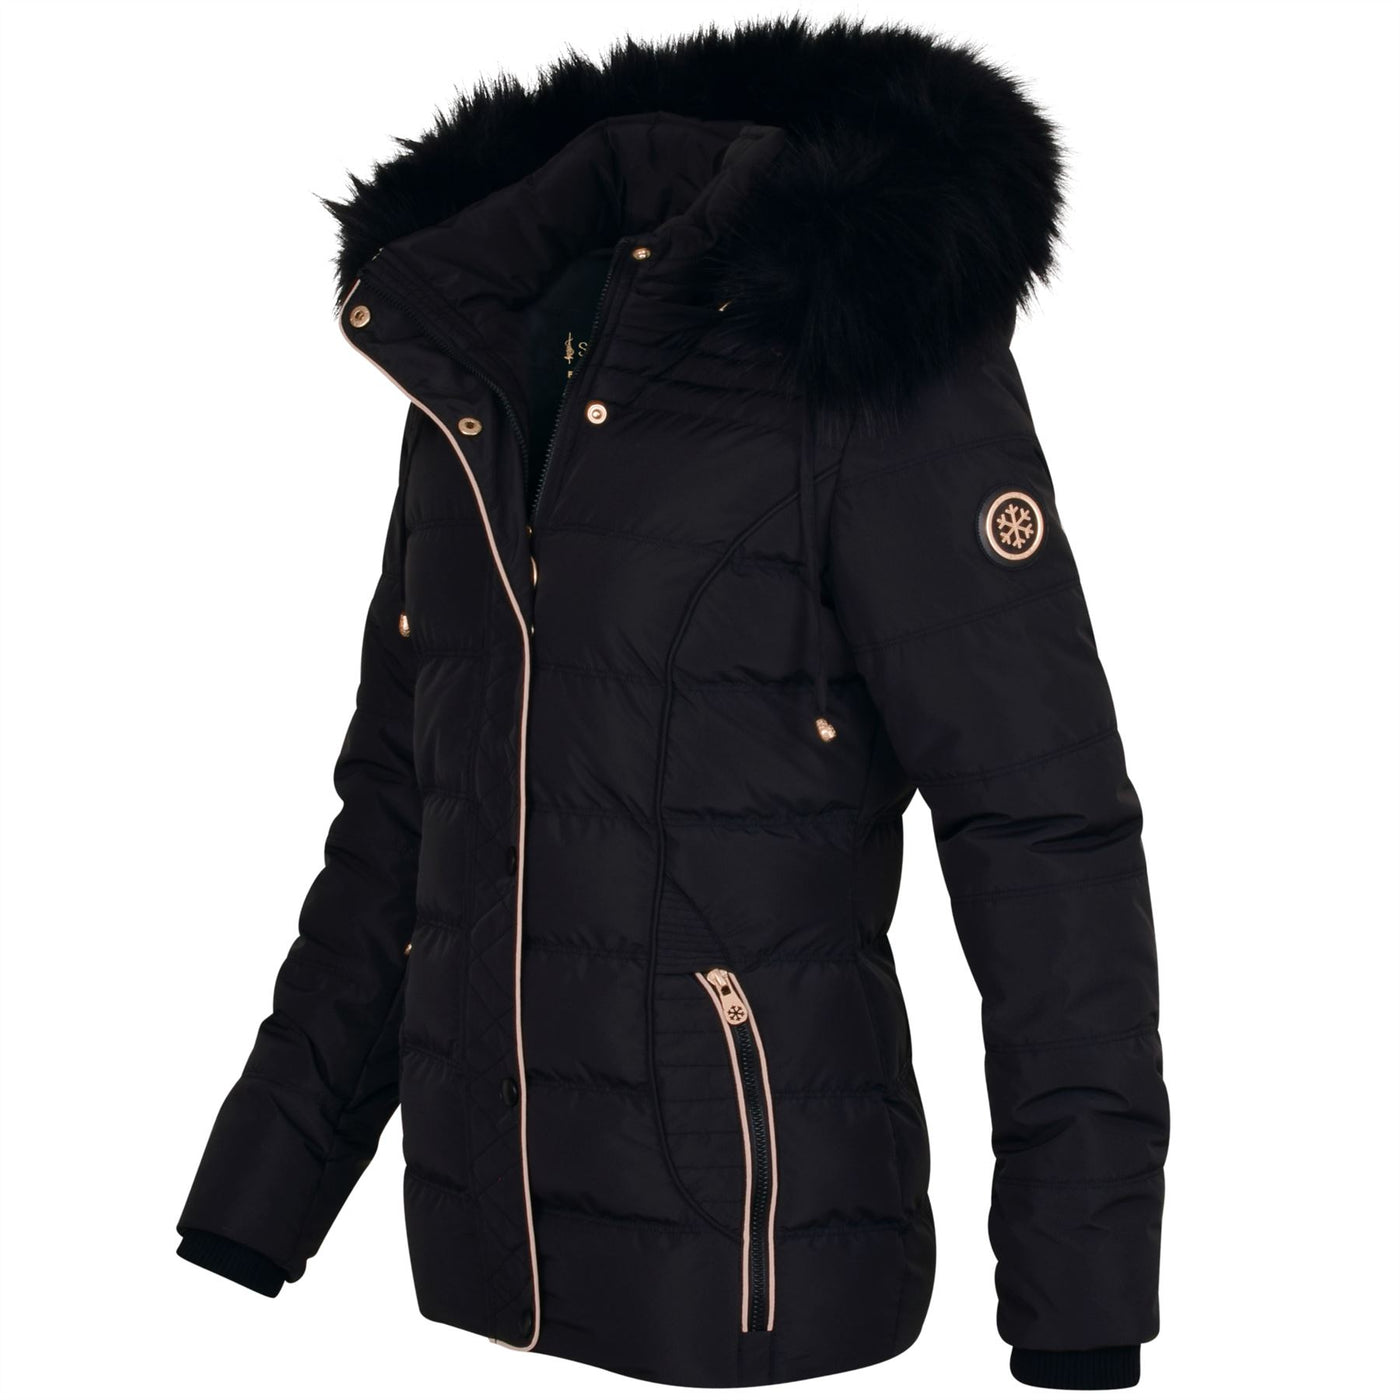 Spindle Womens Ladies Premium Quality Hooded Short Fur Parka Quilted Padded Puffer Coat |  Zip Side Pockets | Luxurious Detachable Faux Fur on Hood | Zipped Inner Pocket